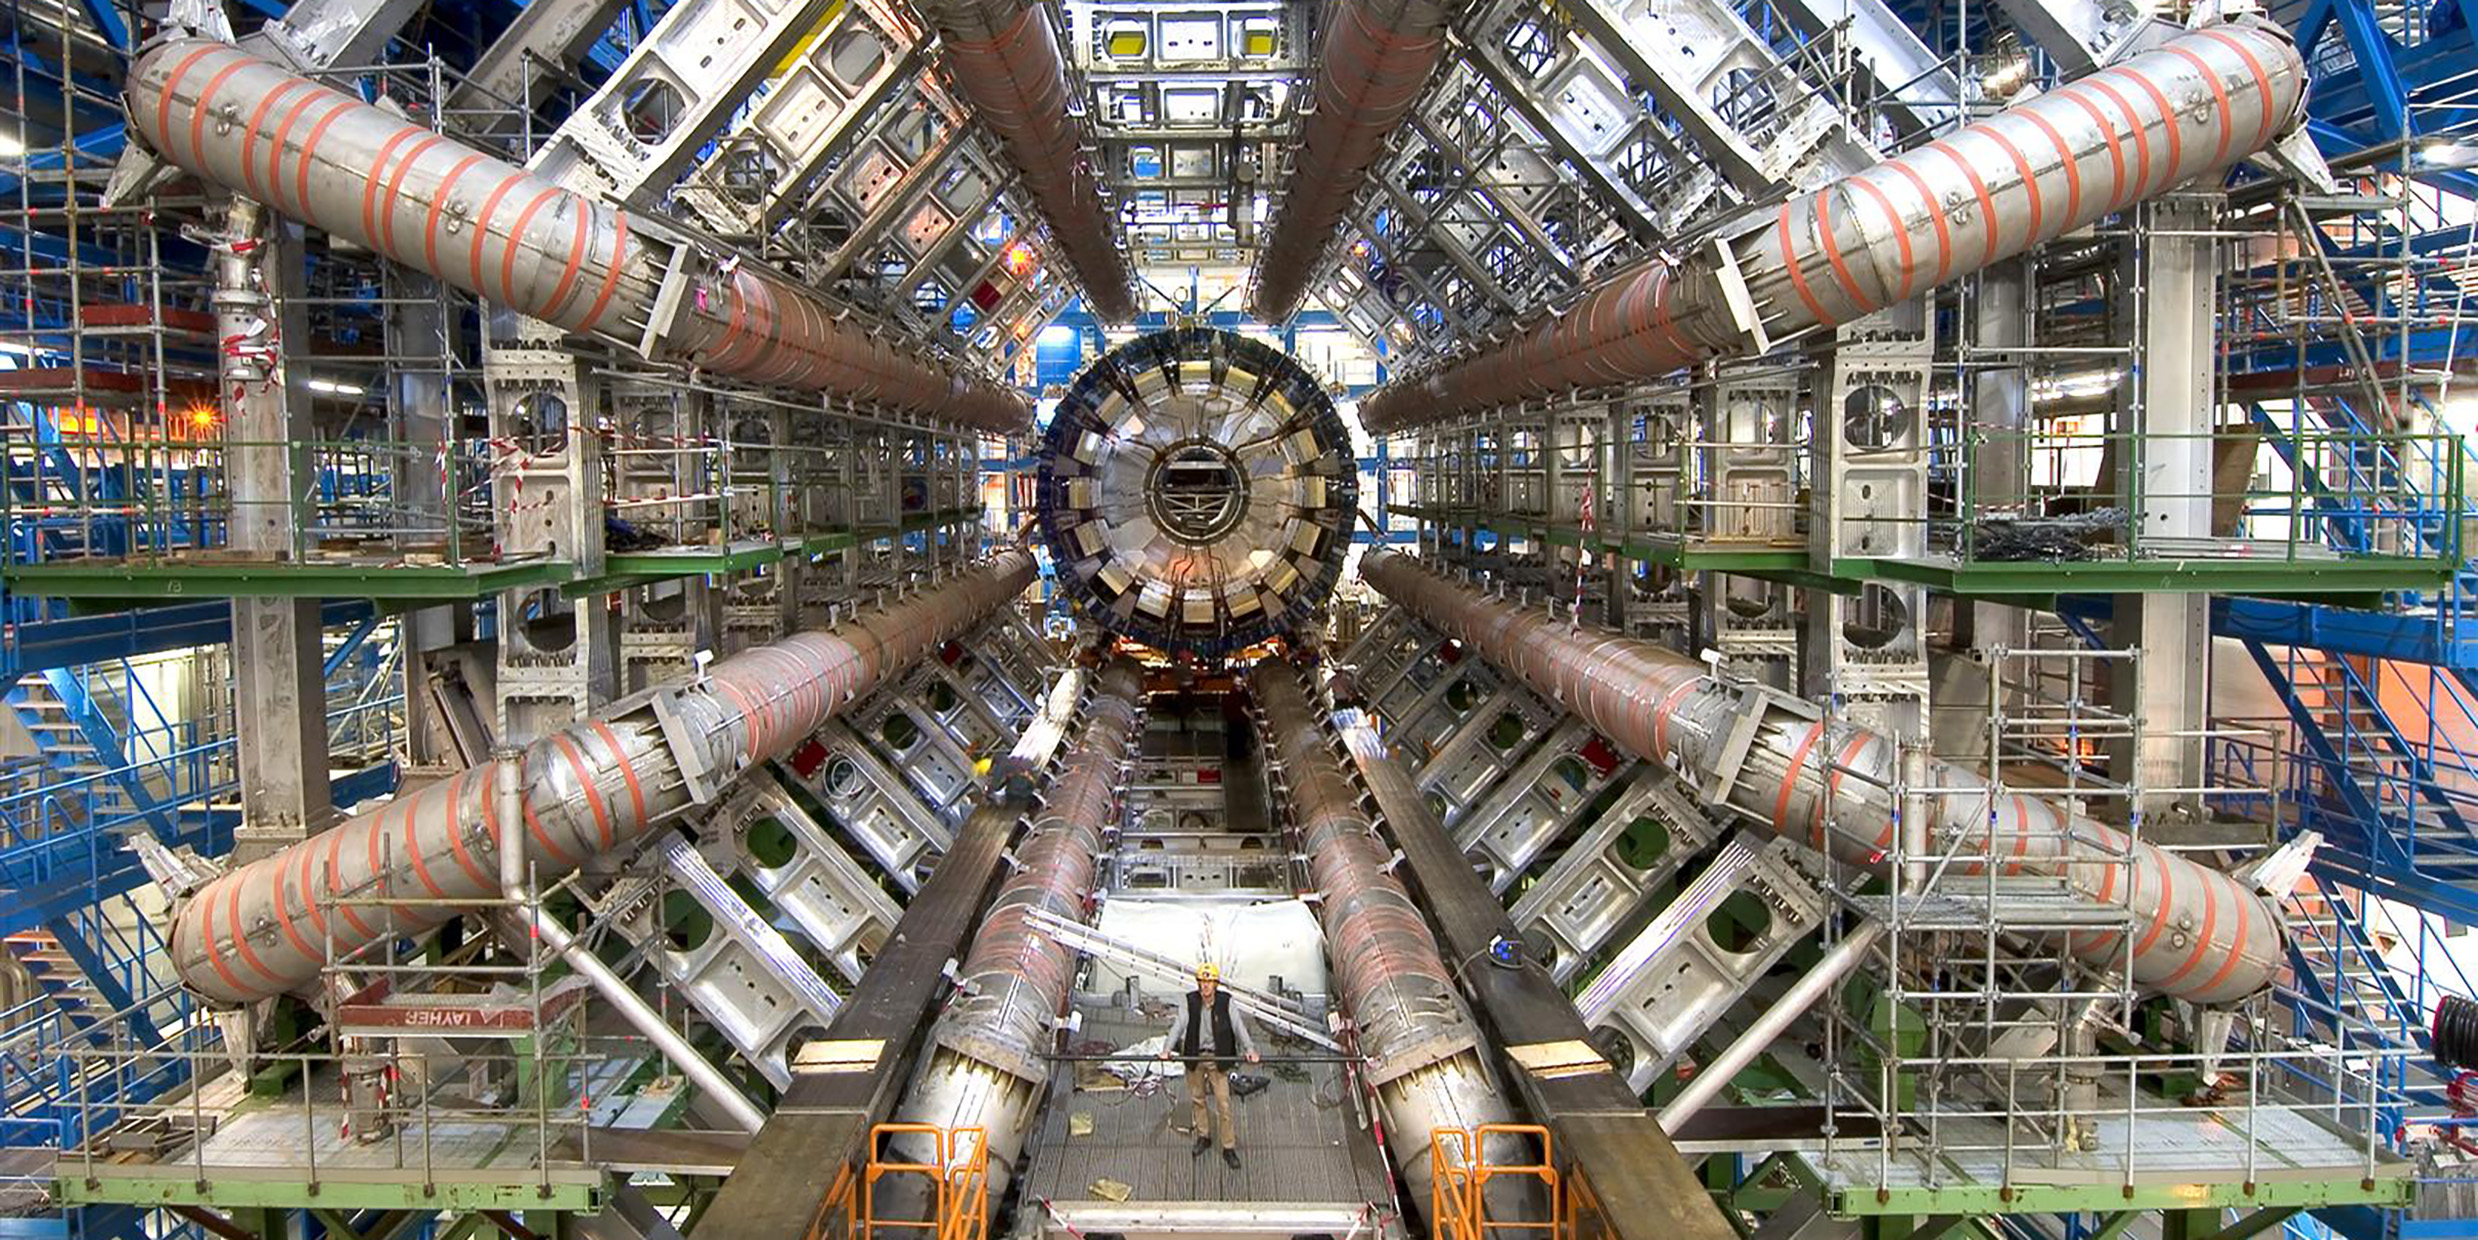 Image of large particle accelerator